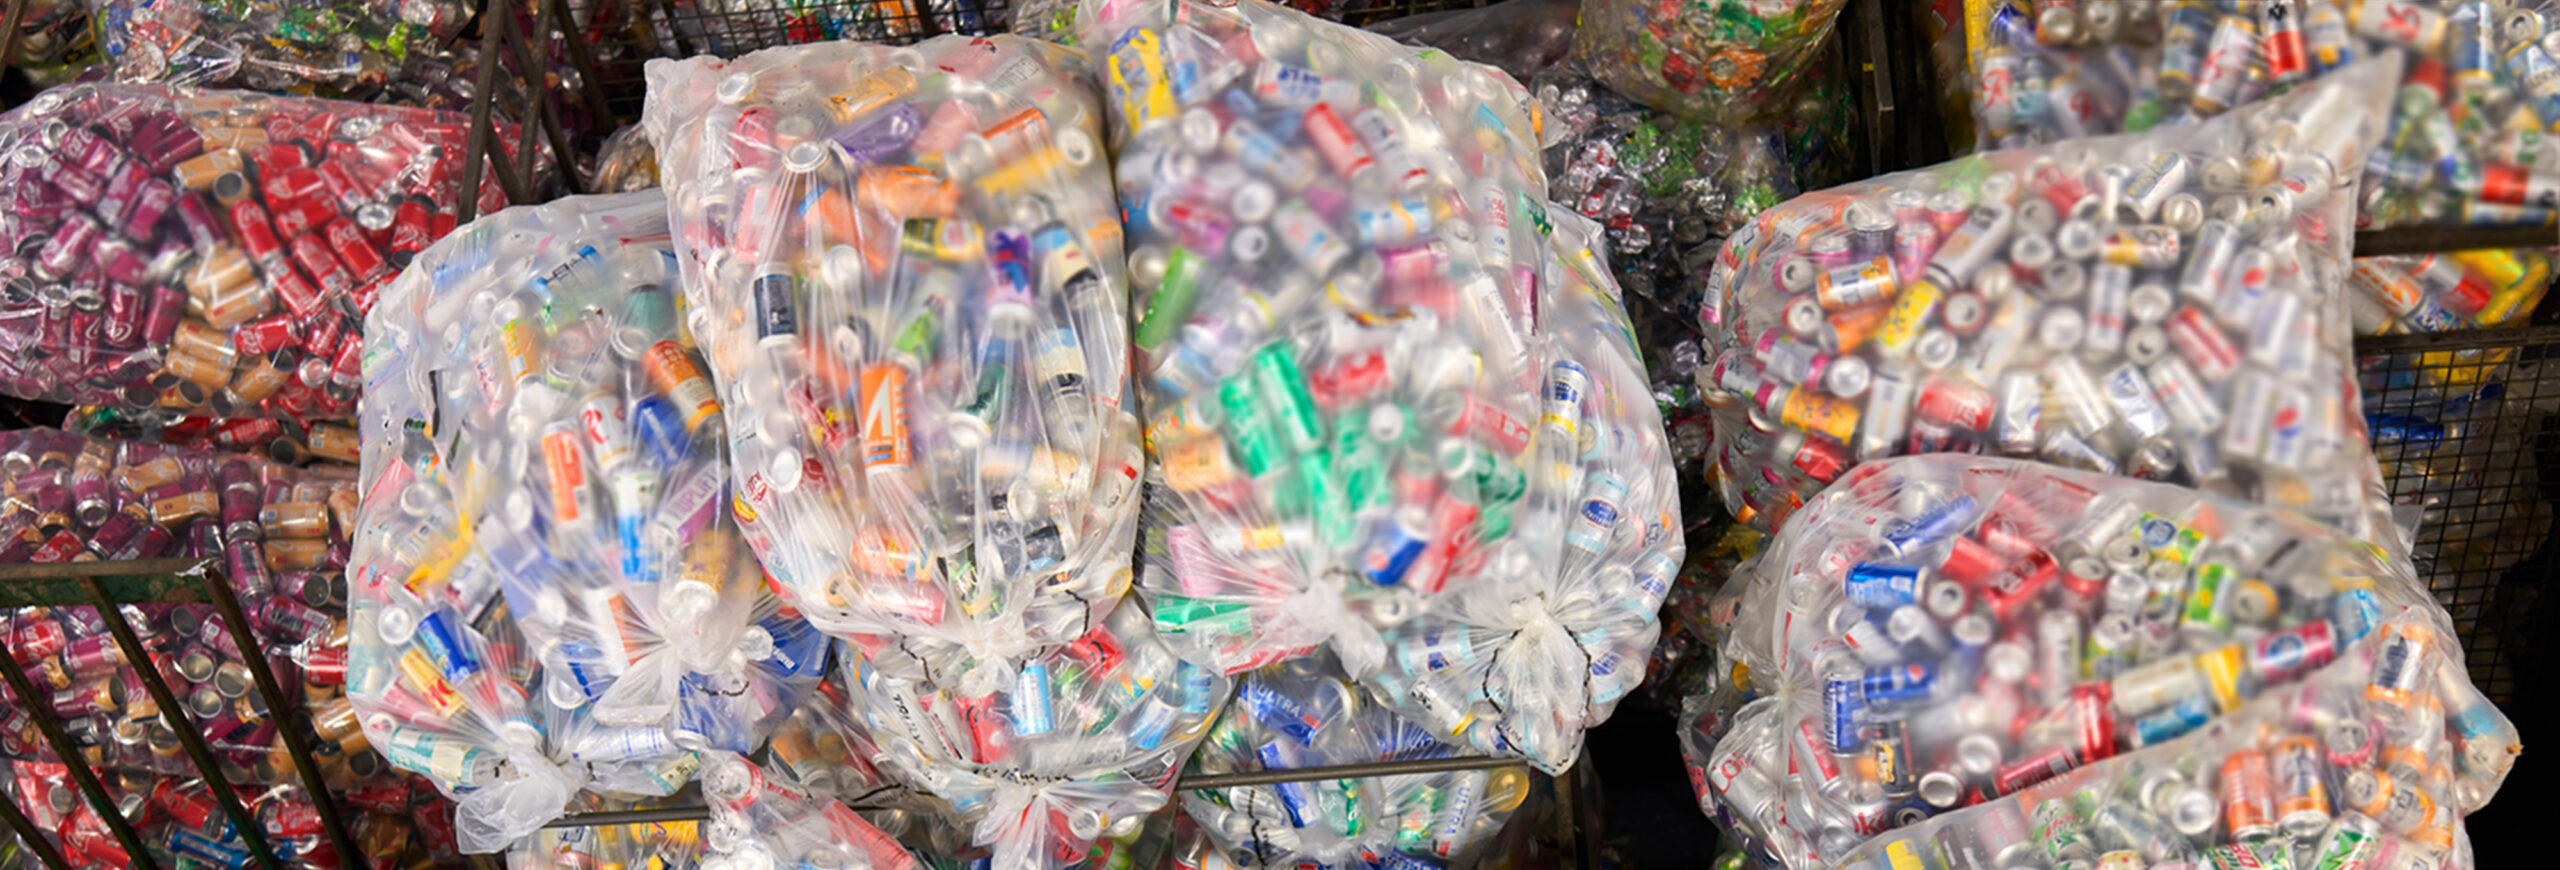 Many clear plastic bags full of recyclable beverage cans stacked together.